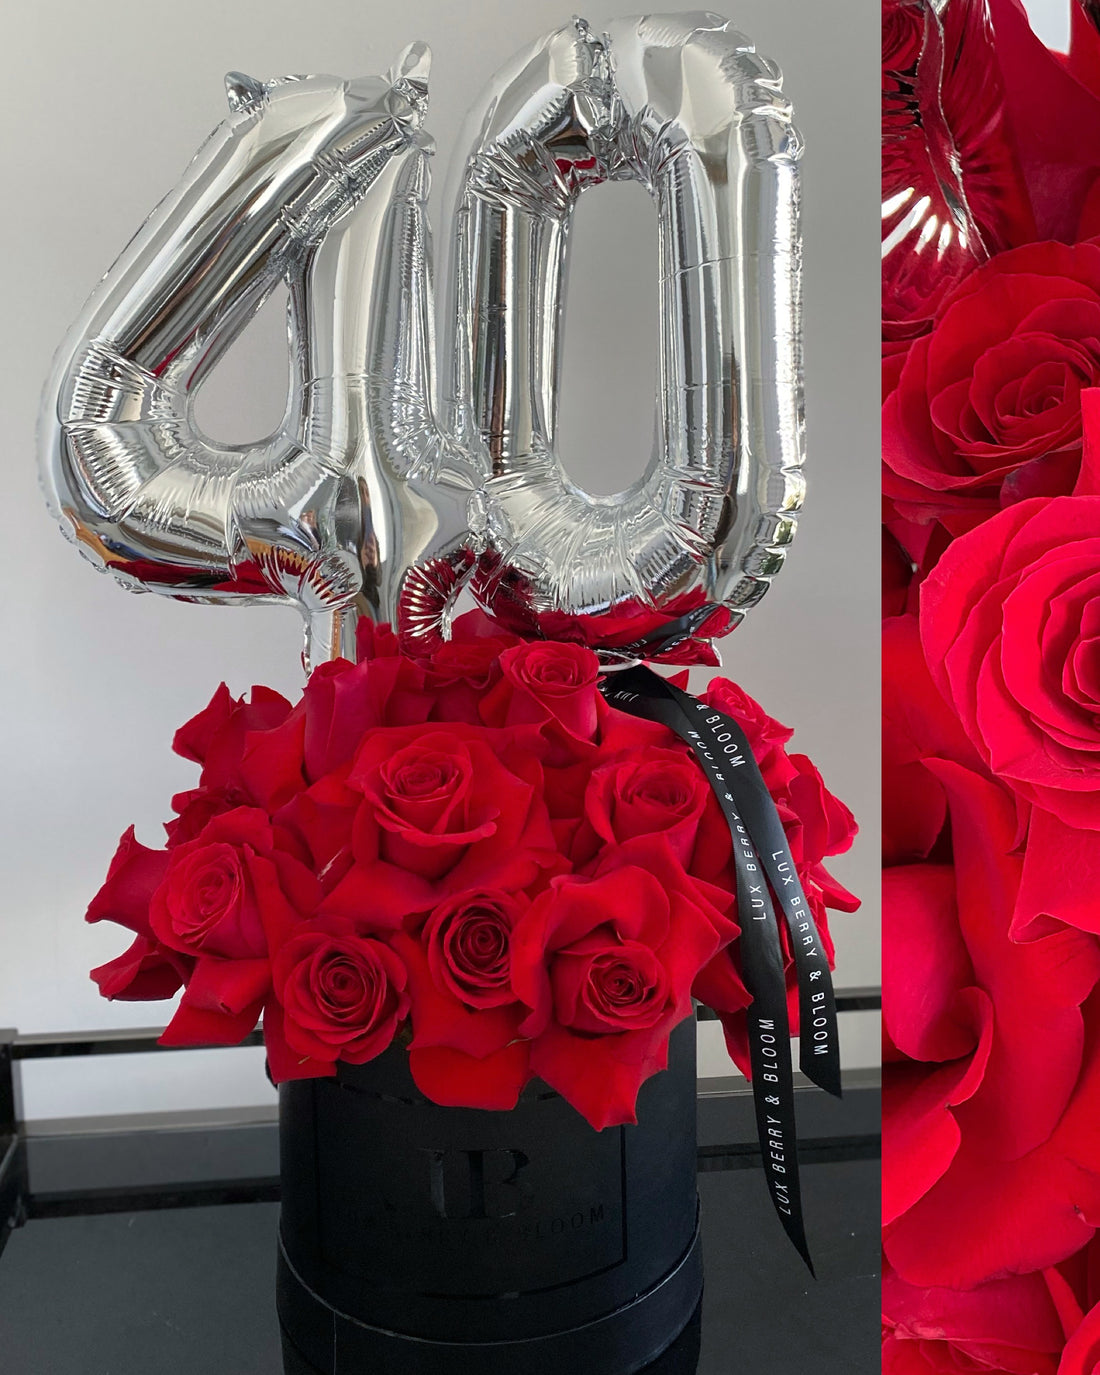 Foil Numbers and Roses Arrangement